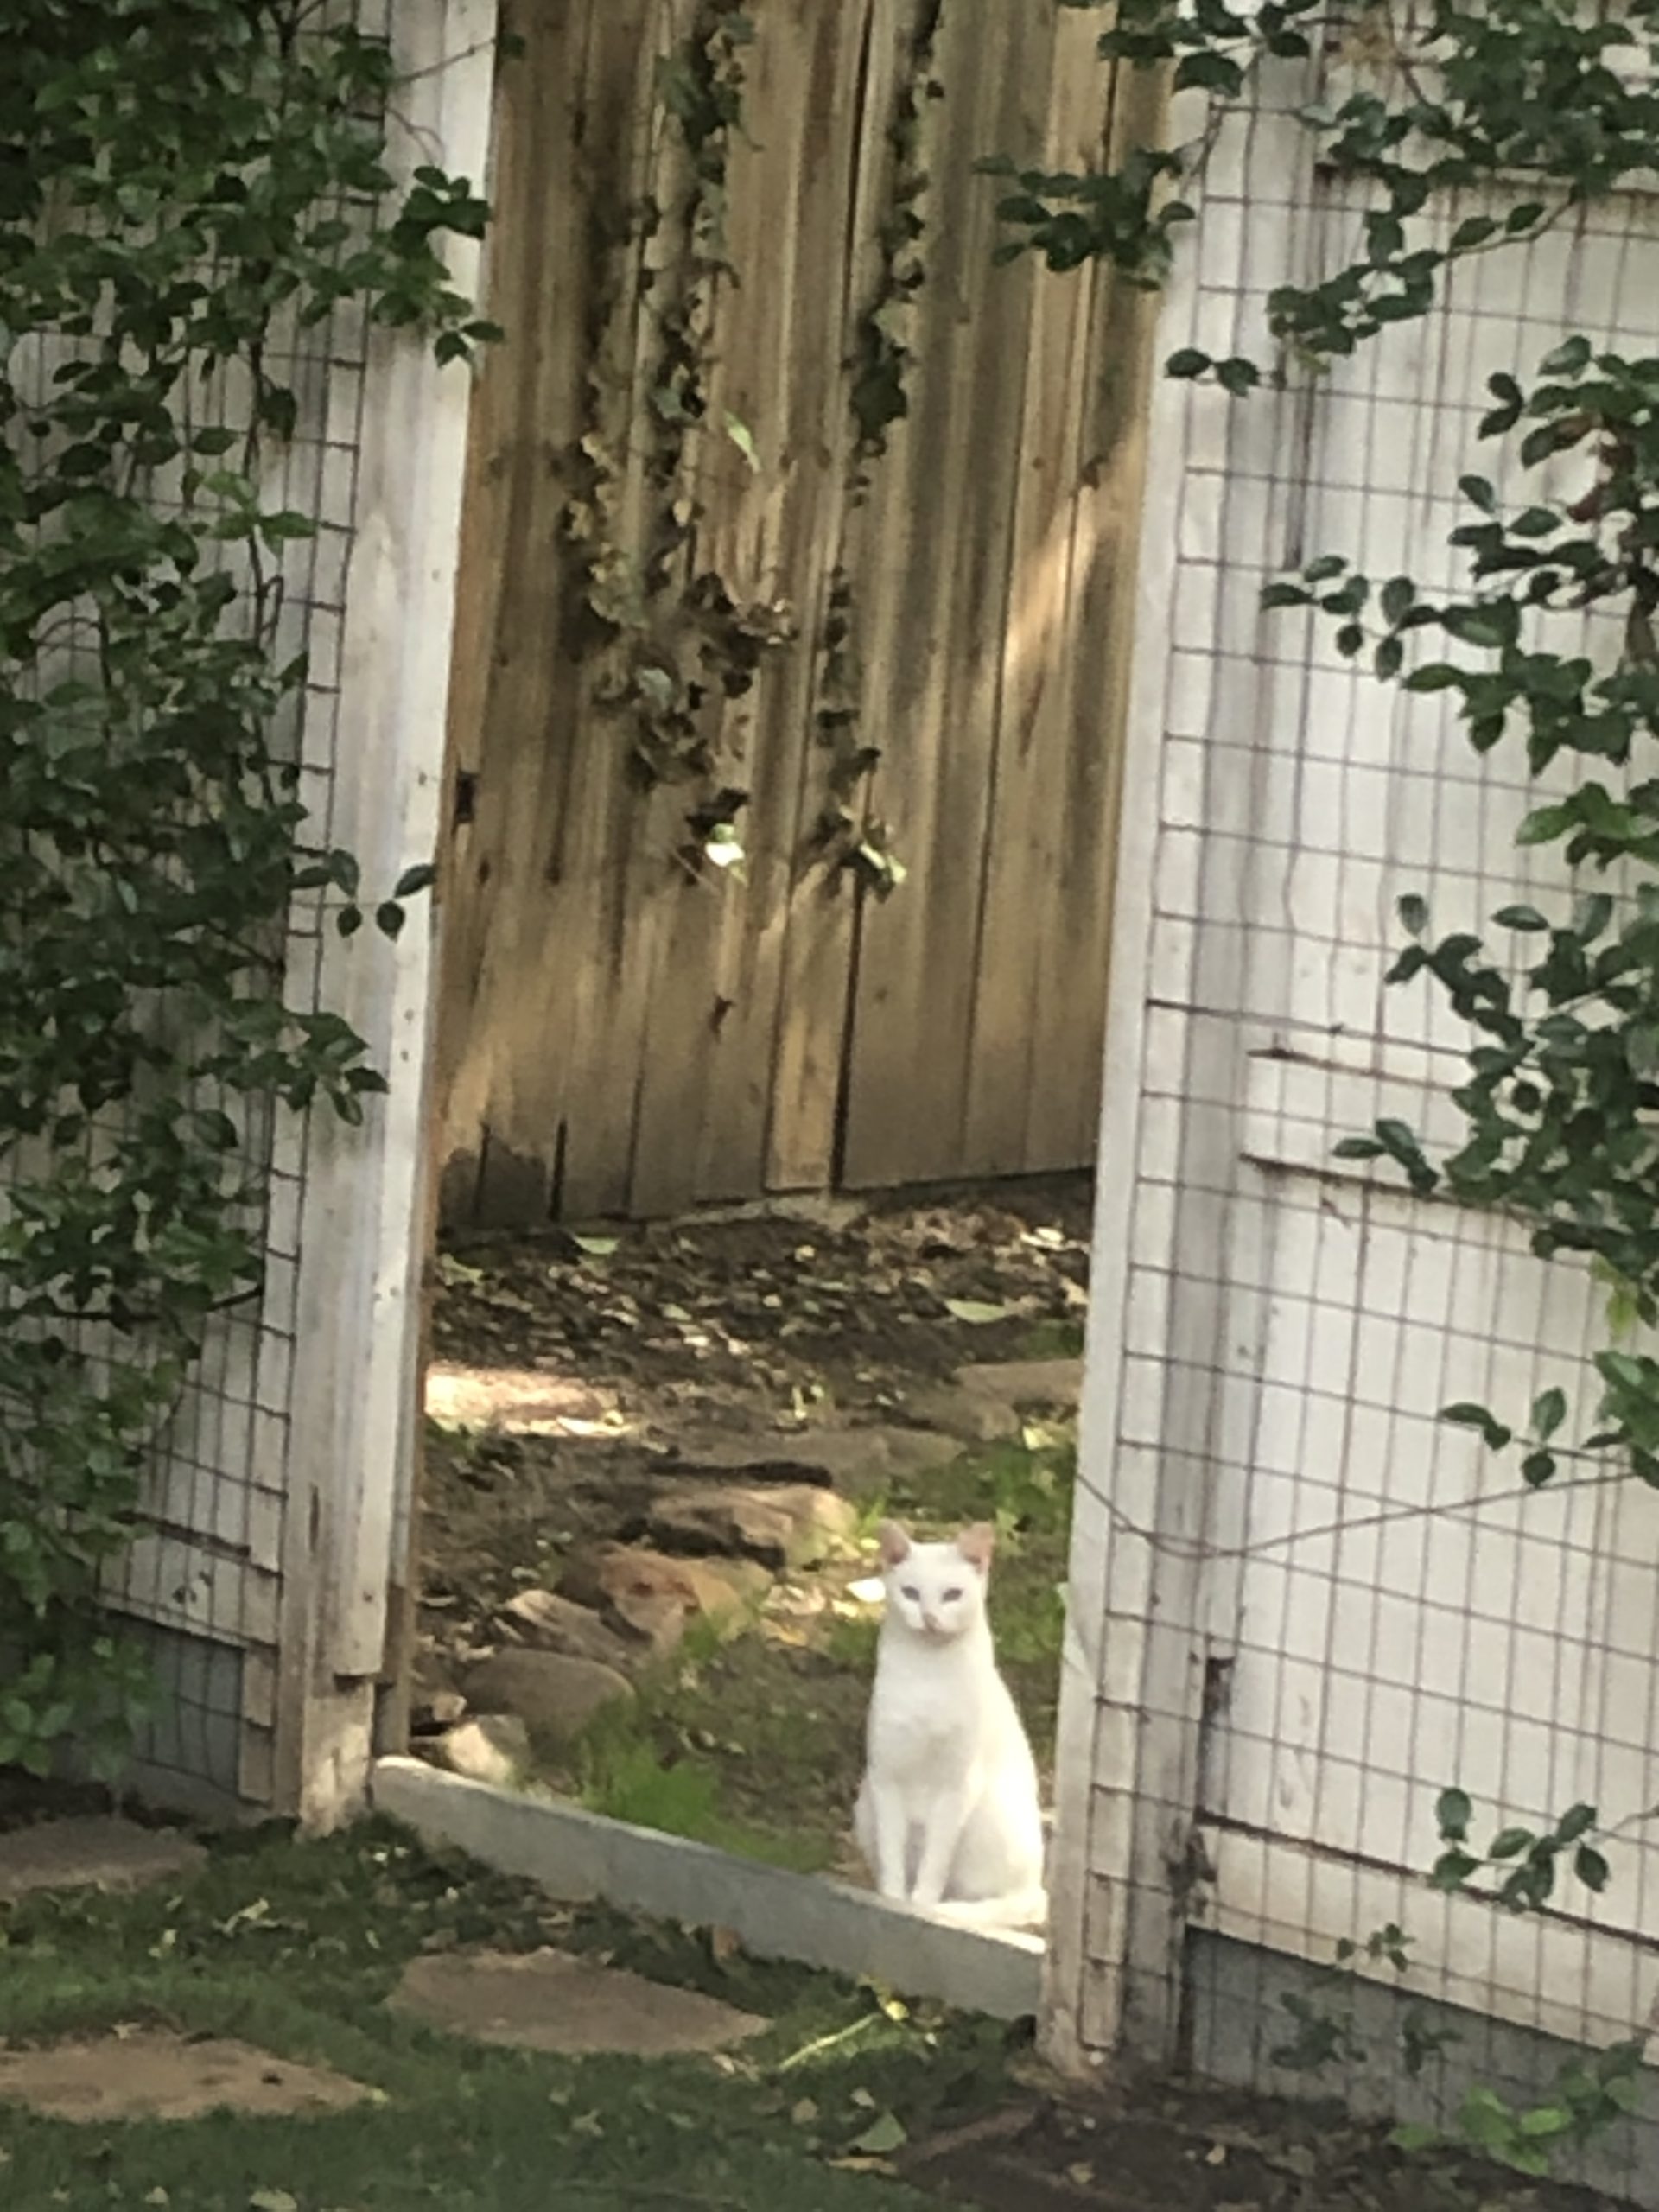 The Cate at the Gate